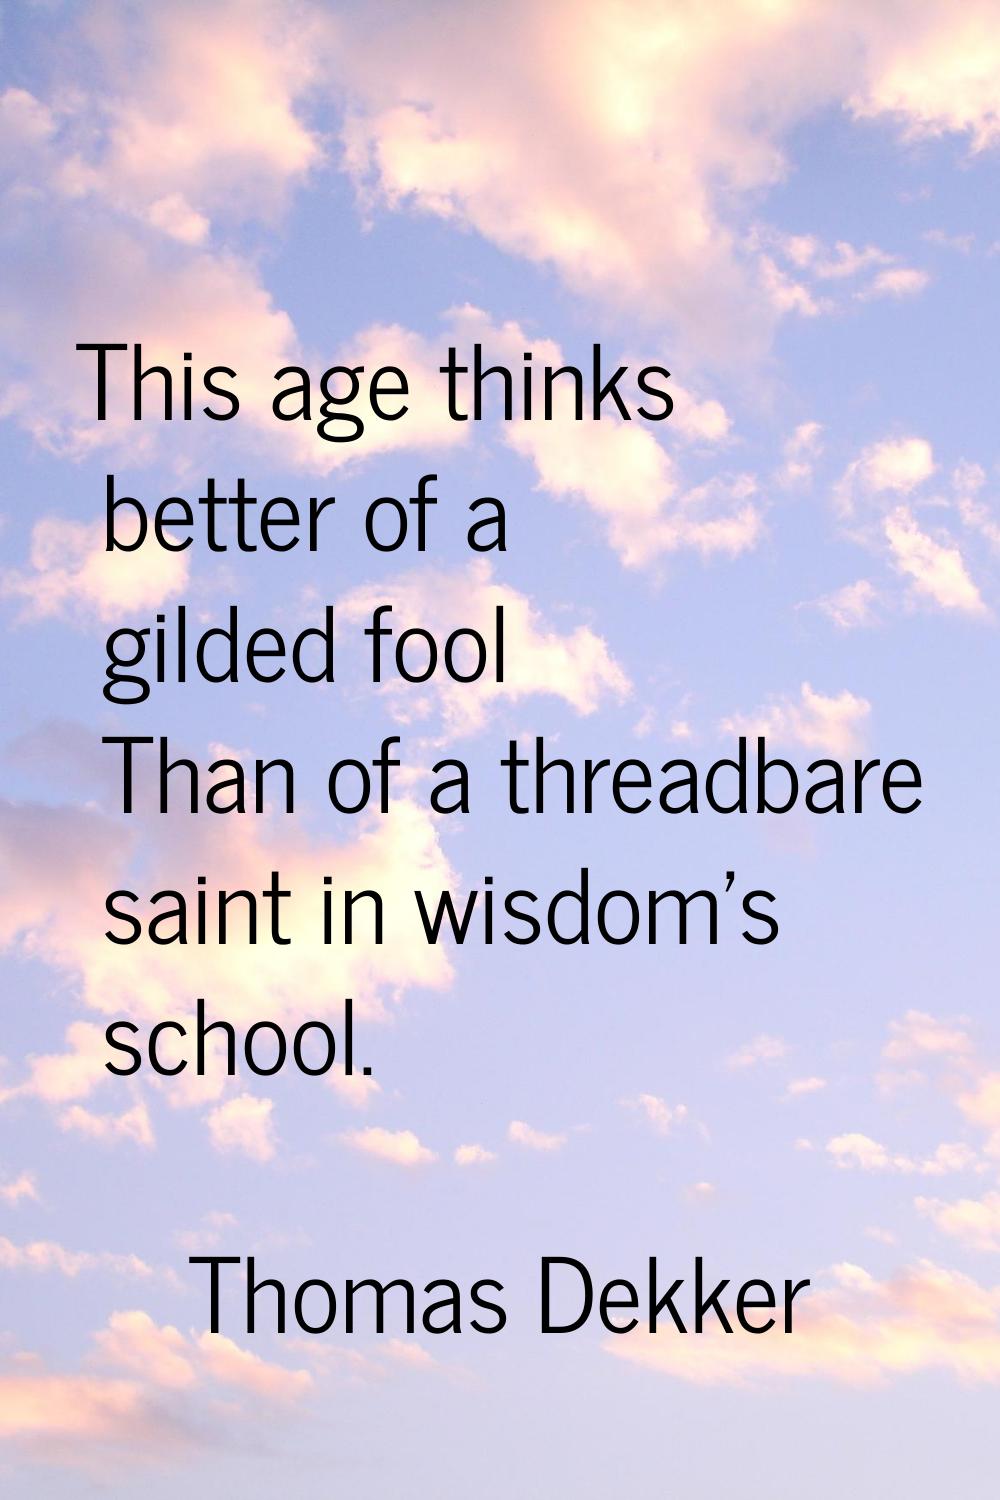 This age thinks better of a gilded fool Than of a threadbare saint in wisdom's school.